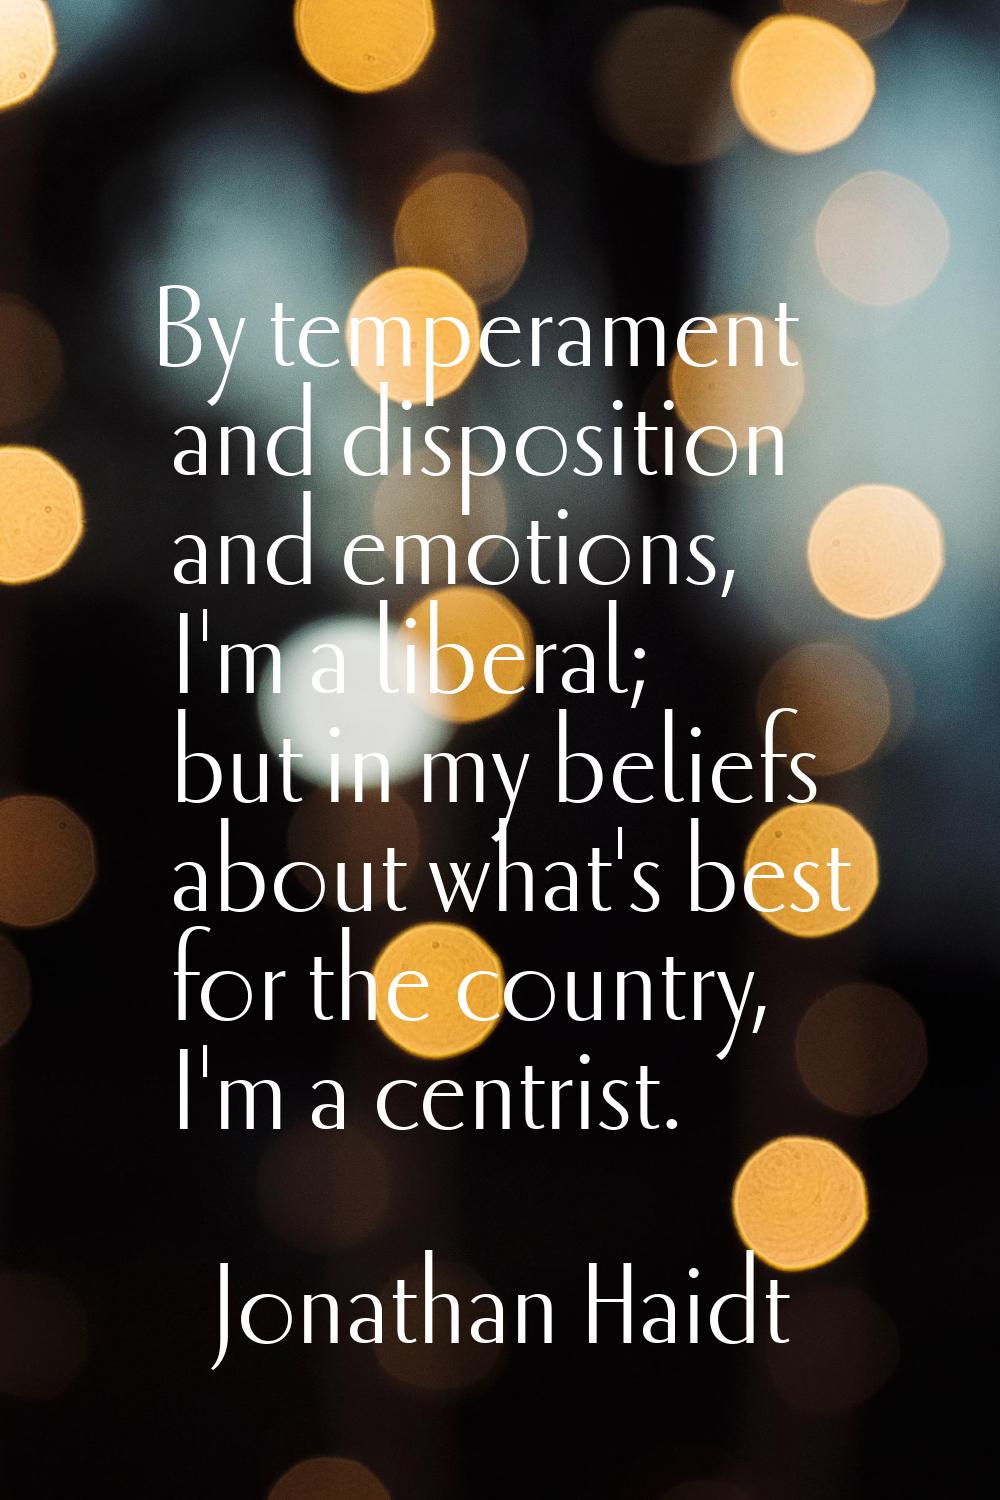 By temperament and disposition and emotions, I'm a liberal; but in my beliefs about what's best for